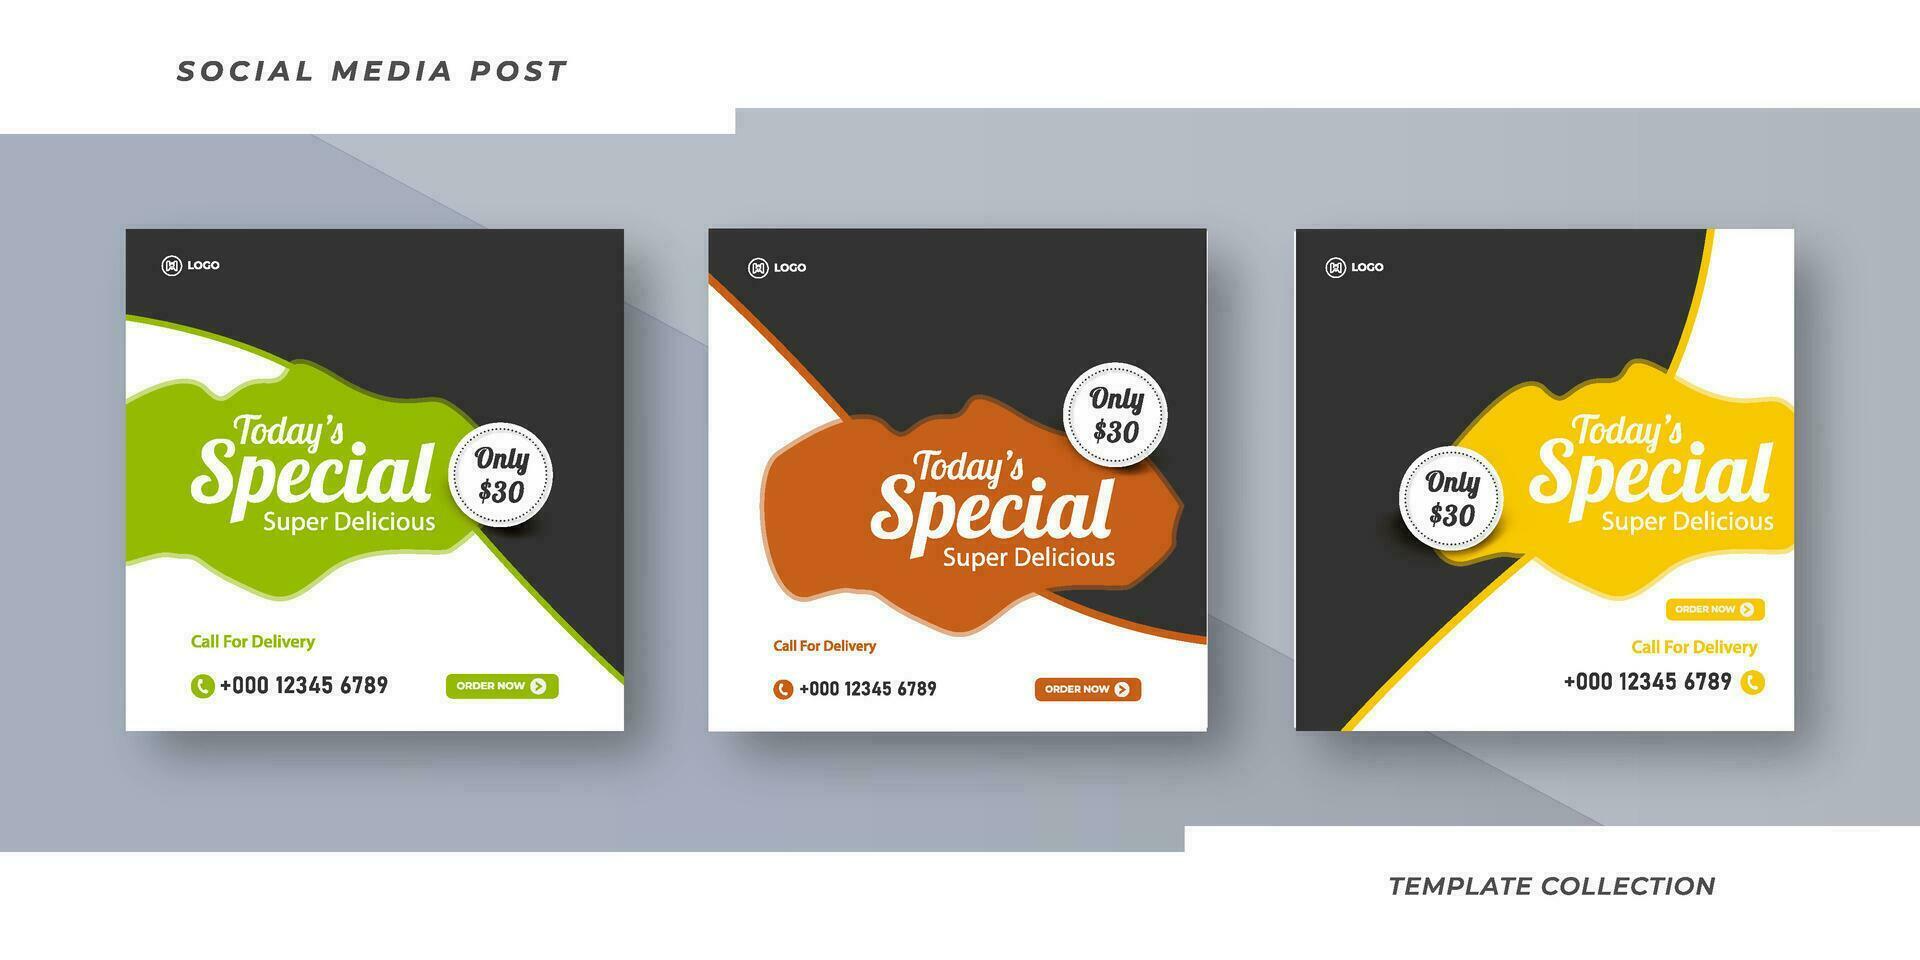 Today's Special Menu Super Delicious  Social Media Post for Online Marketing Promotion Banner, Story Pro Vector